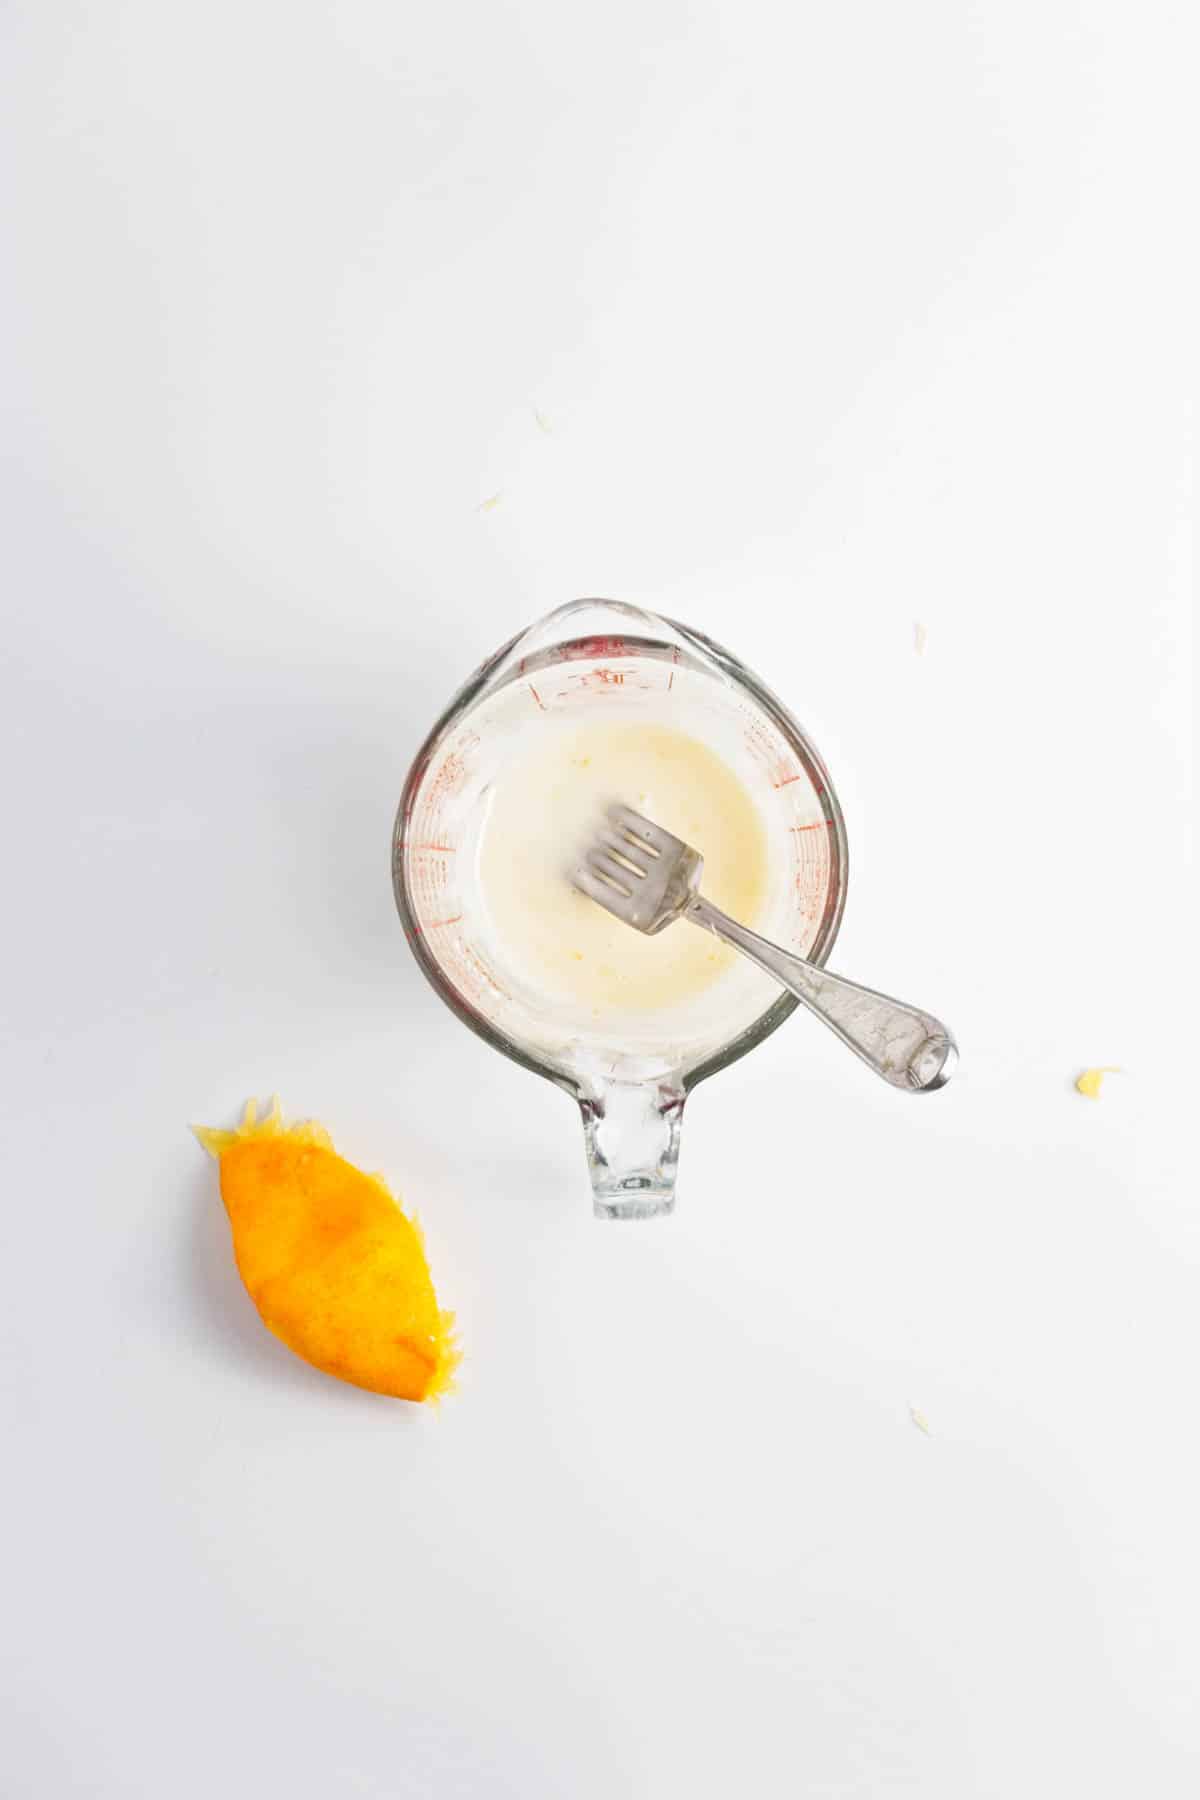 Orange juice and powdered sugar icing in a measuring cup with a fork and orange peel to the side.